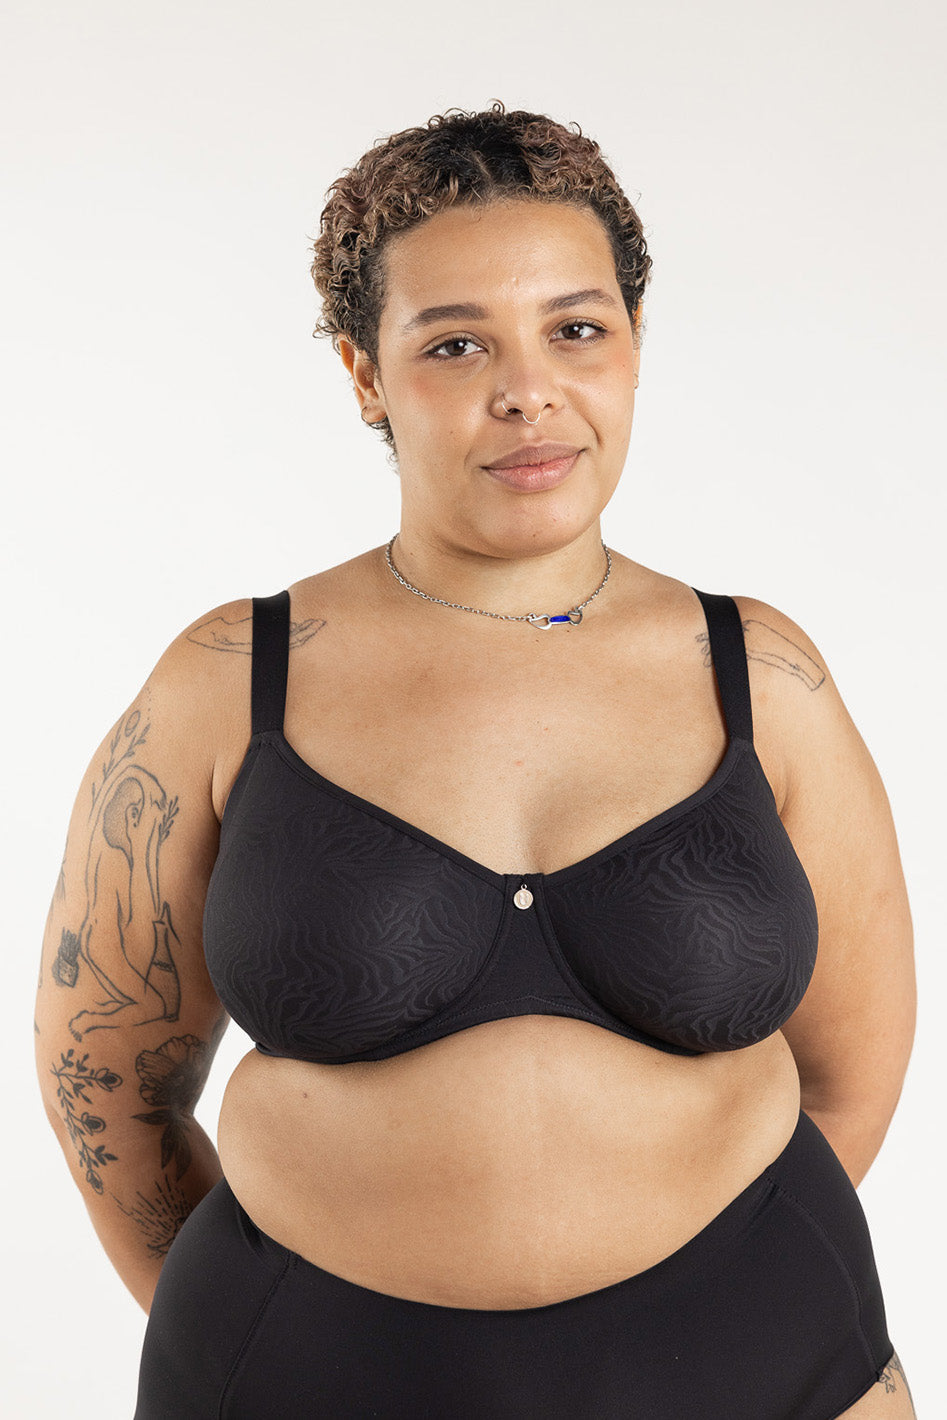 YBCG Balconette See Through Plus Size Bra Comfy Demi Unlined Sheer